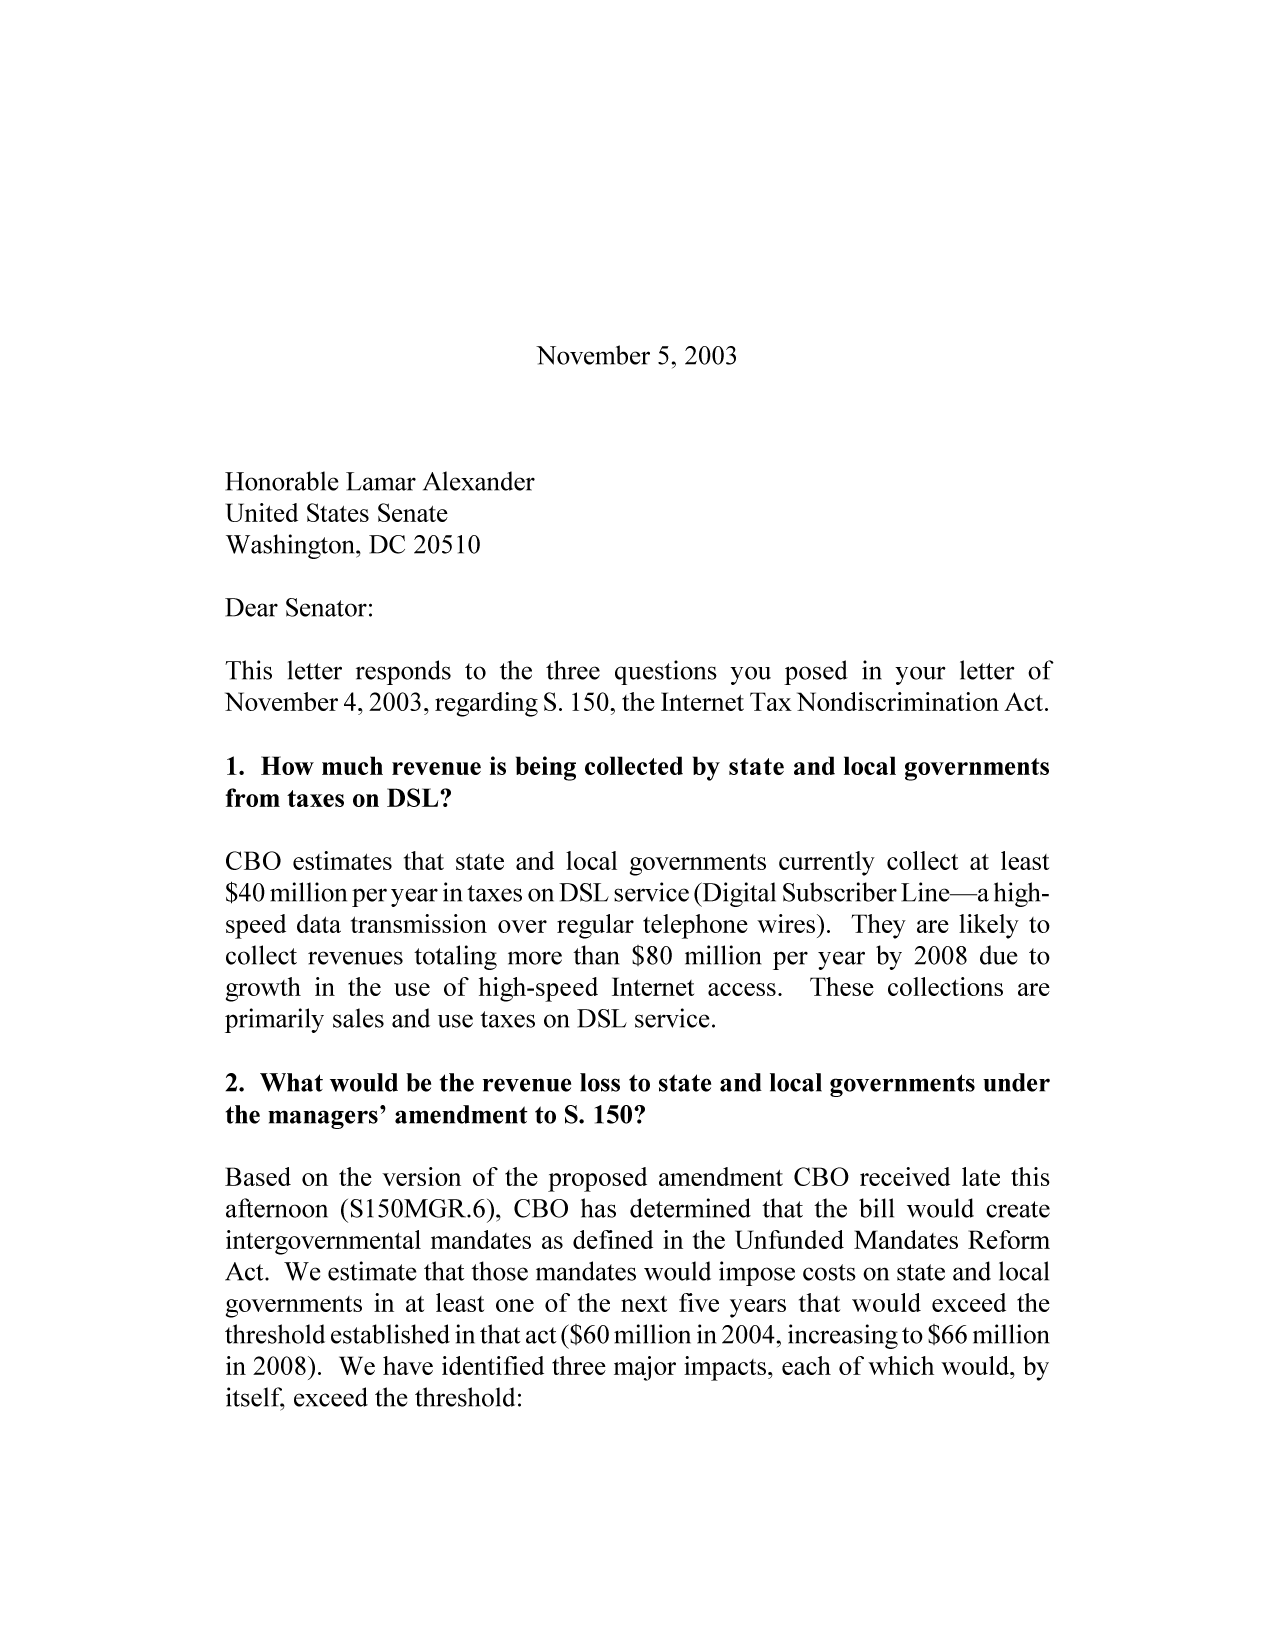 handle is hein.congrec/cbo9453 and id is 1 raw text is: November 5, 2003

Honorable Lamar Alexander
United States Senate
Washington, DC 20510
Dear Senator:
This letter responds to the three questions you posed in your letter of
November 4, 2003, regarding S. 150, the Internet Tax Nondiscrimination Act.
1. How much revenue is being collected by state and local governments
from taxes on DSL?
CBO estimates that state and local governments currently collect at least
$40 million per year in taxes on DSL service (Digital Subscriber Line-a high-
speed data transmission over regular telephone wires). They are likely to
collect revenues totaling more than $80 million per year by 2008 due to
growth in the use of high-speed Internet access. These collections are
primarily sales and use taxes on DSL service.
2. What would be the revenue loss to state and local governments under
the managers' amendment to S. 150?
Based on the version of the proposed amendment CBO received late this
afternoon (S150MGR.6), CBO has determined that the bill would create
intergovernmental mandates as defined in the Unfunded Mandates Reform
Act. We estimate that those mandates would impose costs on state and local
governments in at least one of the next five years that would exceed the
threshold established in that act ($60 million in 2004, increasing to $66 million
in 2008). We have identified three major impacts, each of which would, by
itself, exceed the threshold:


